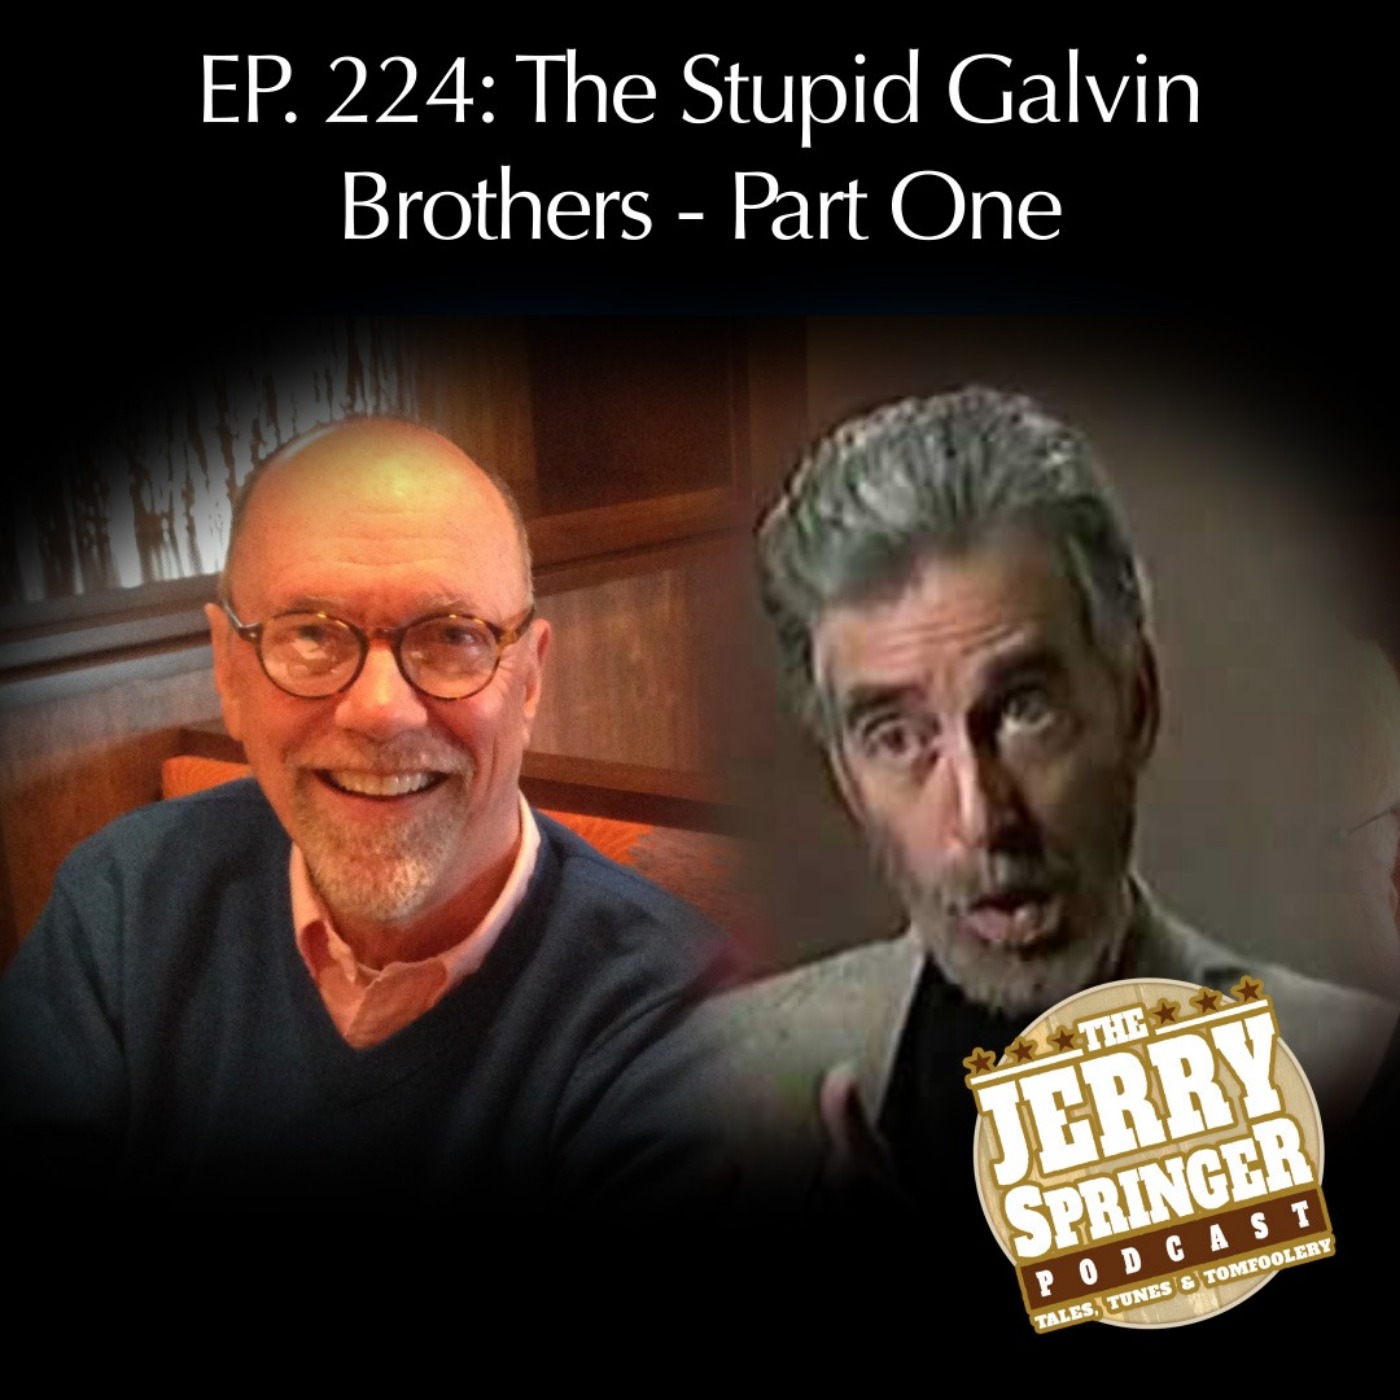 Guest Hosts: The Stupid Galvin Brothers. Episode 224